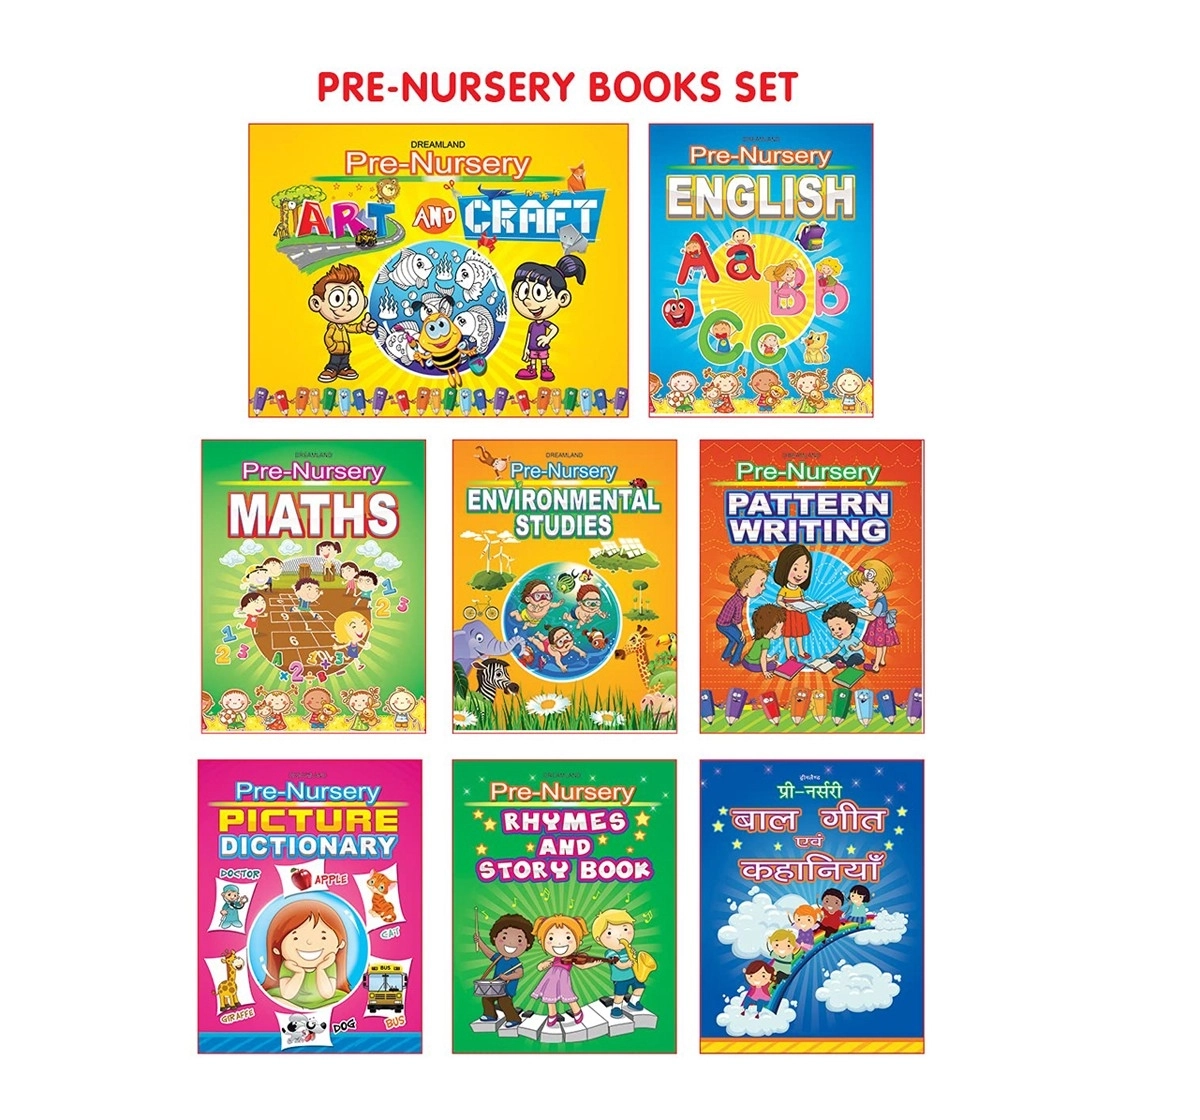 Dreamland Paperback My Complete Kit of Prenumber Books for Kids 3Y+, Multicolour